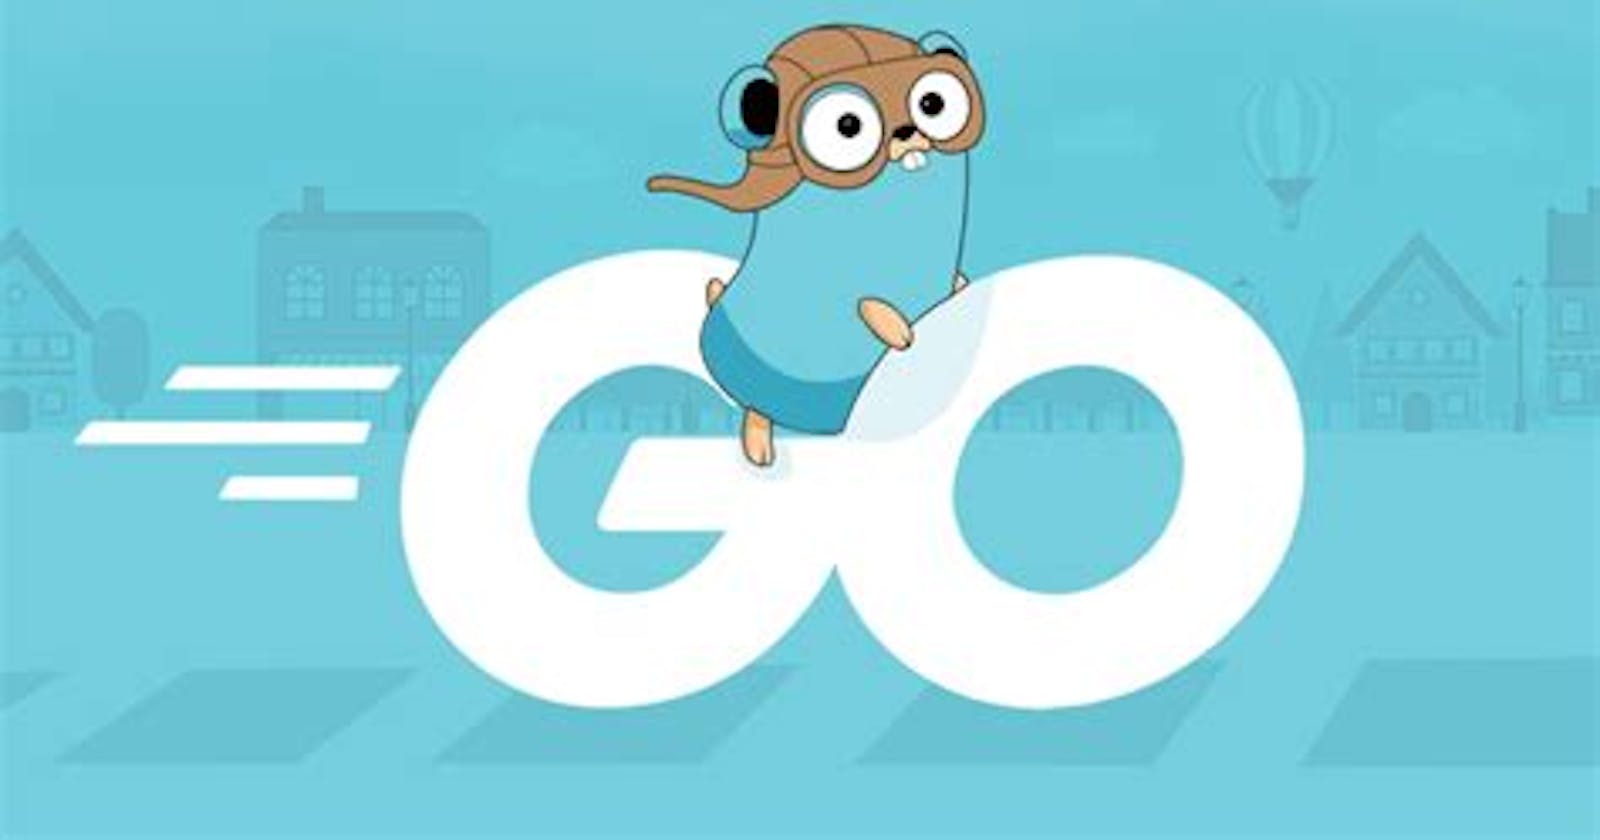 Introduction to Go